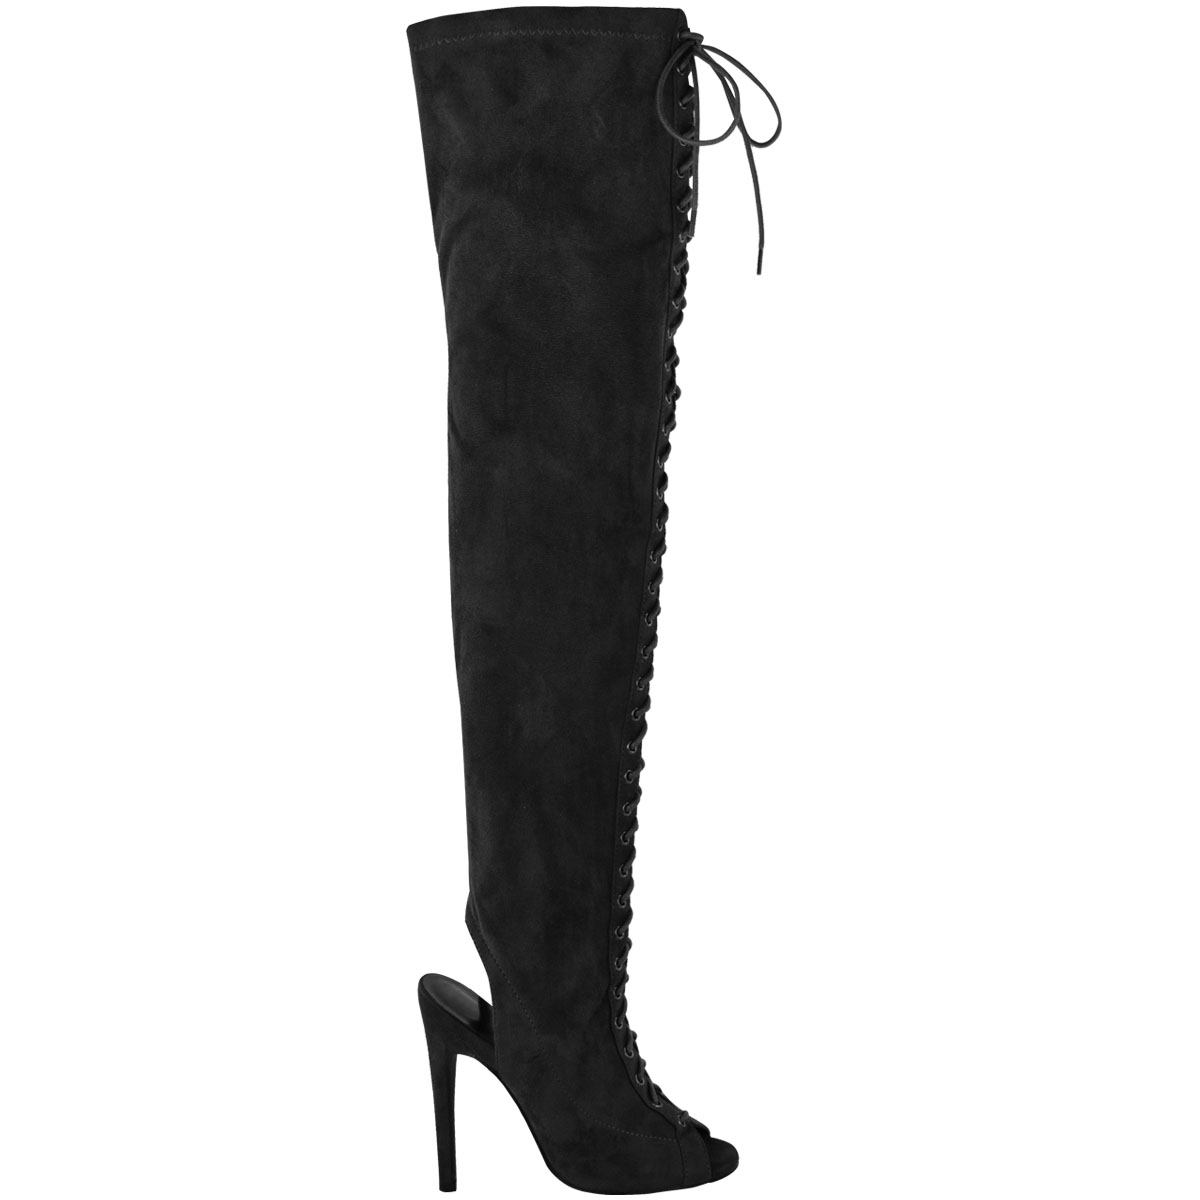 WOMENS LADIES SEXY OVER THE KNEE THIGH HIGH LACE UP STILETTOS HEELS ...